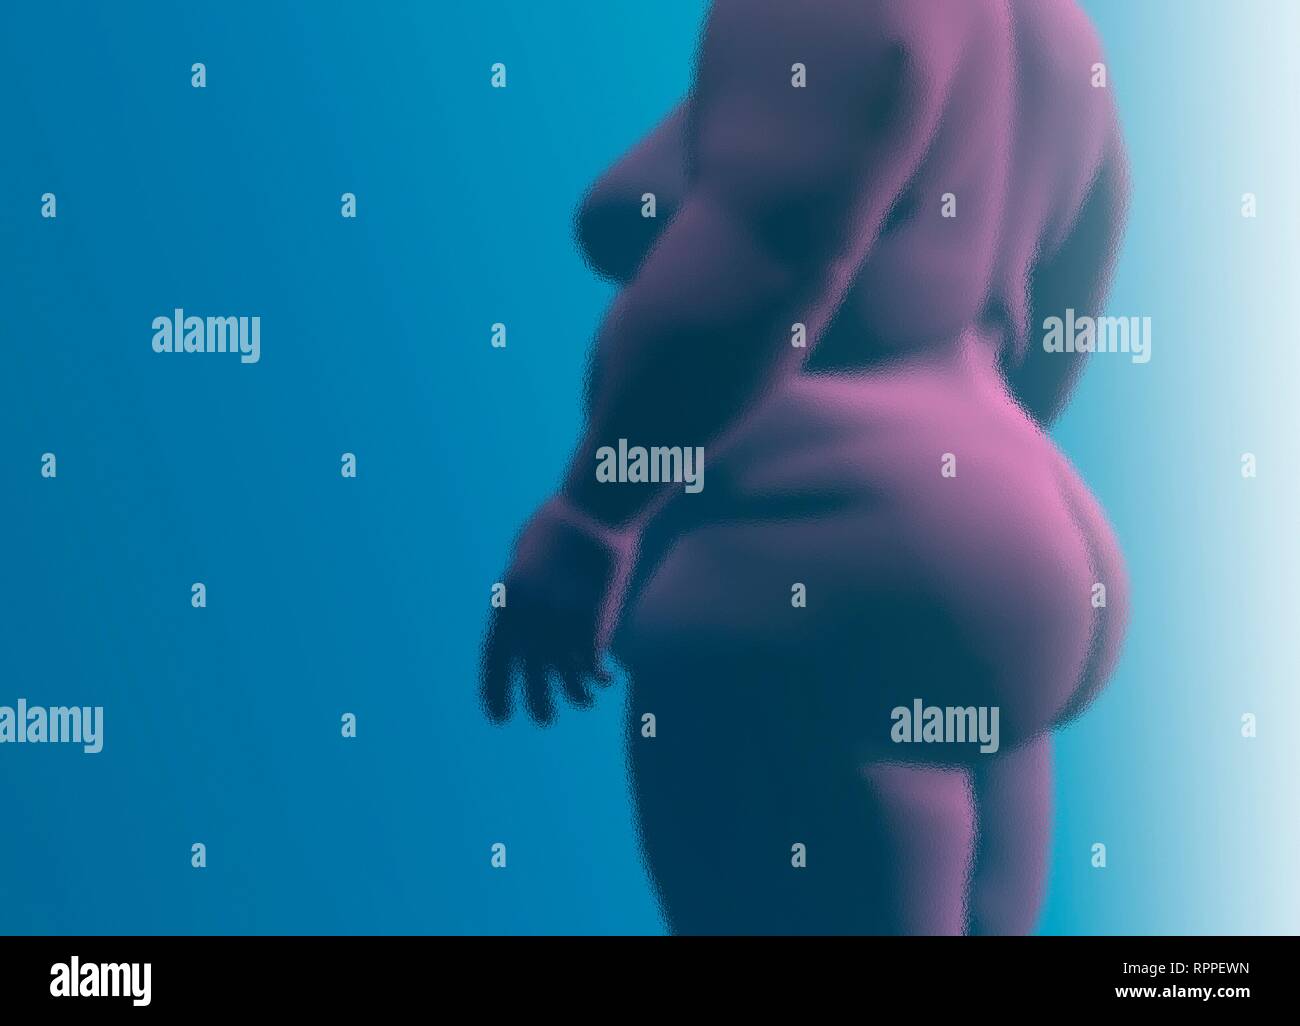 Obese woman, conceptual illustration. Stock Photo